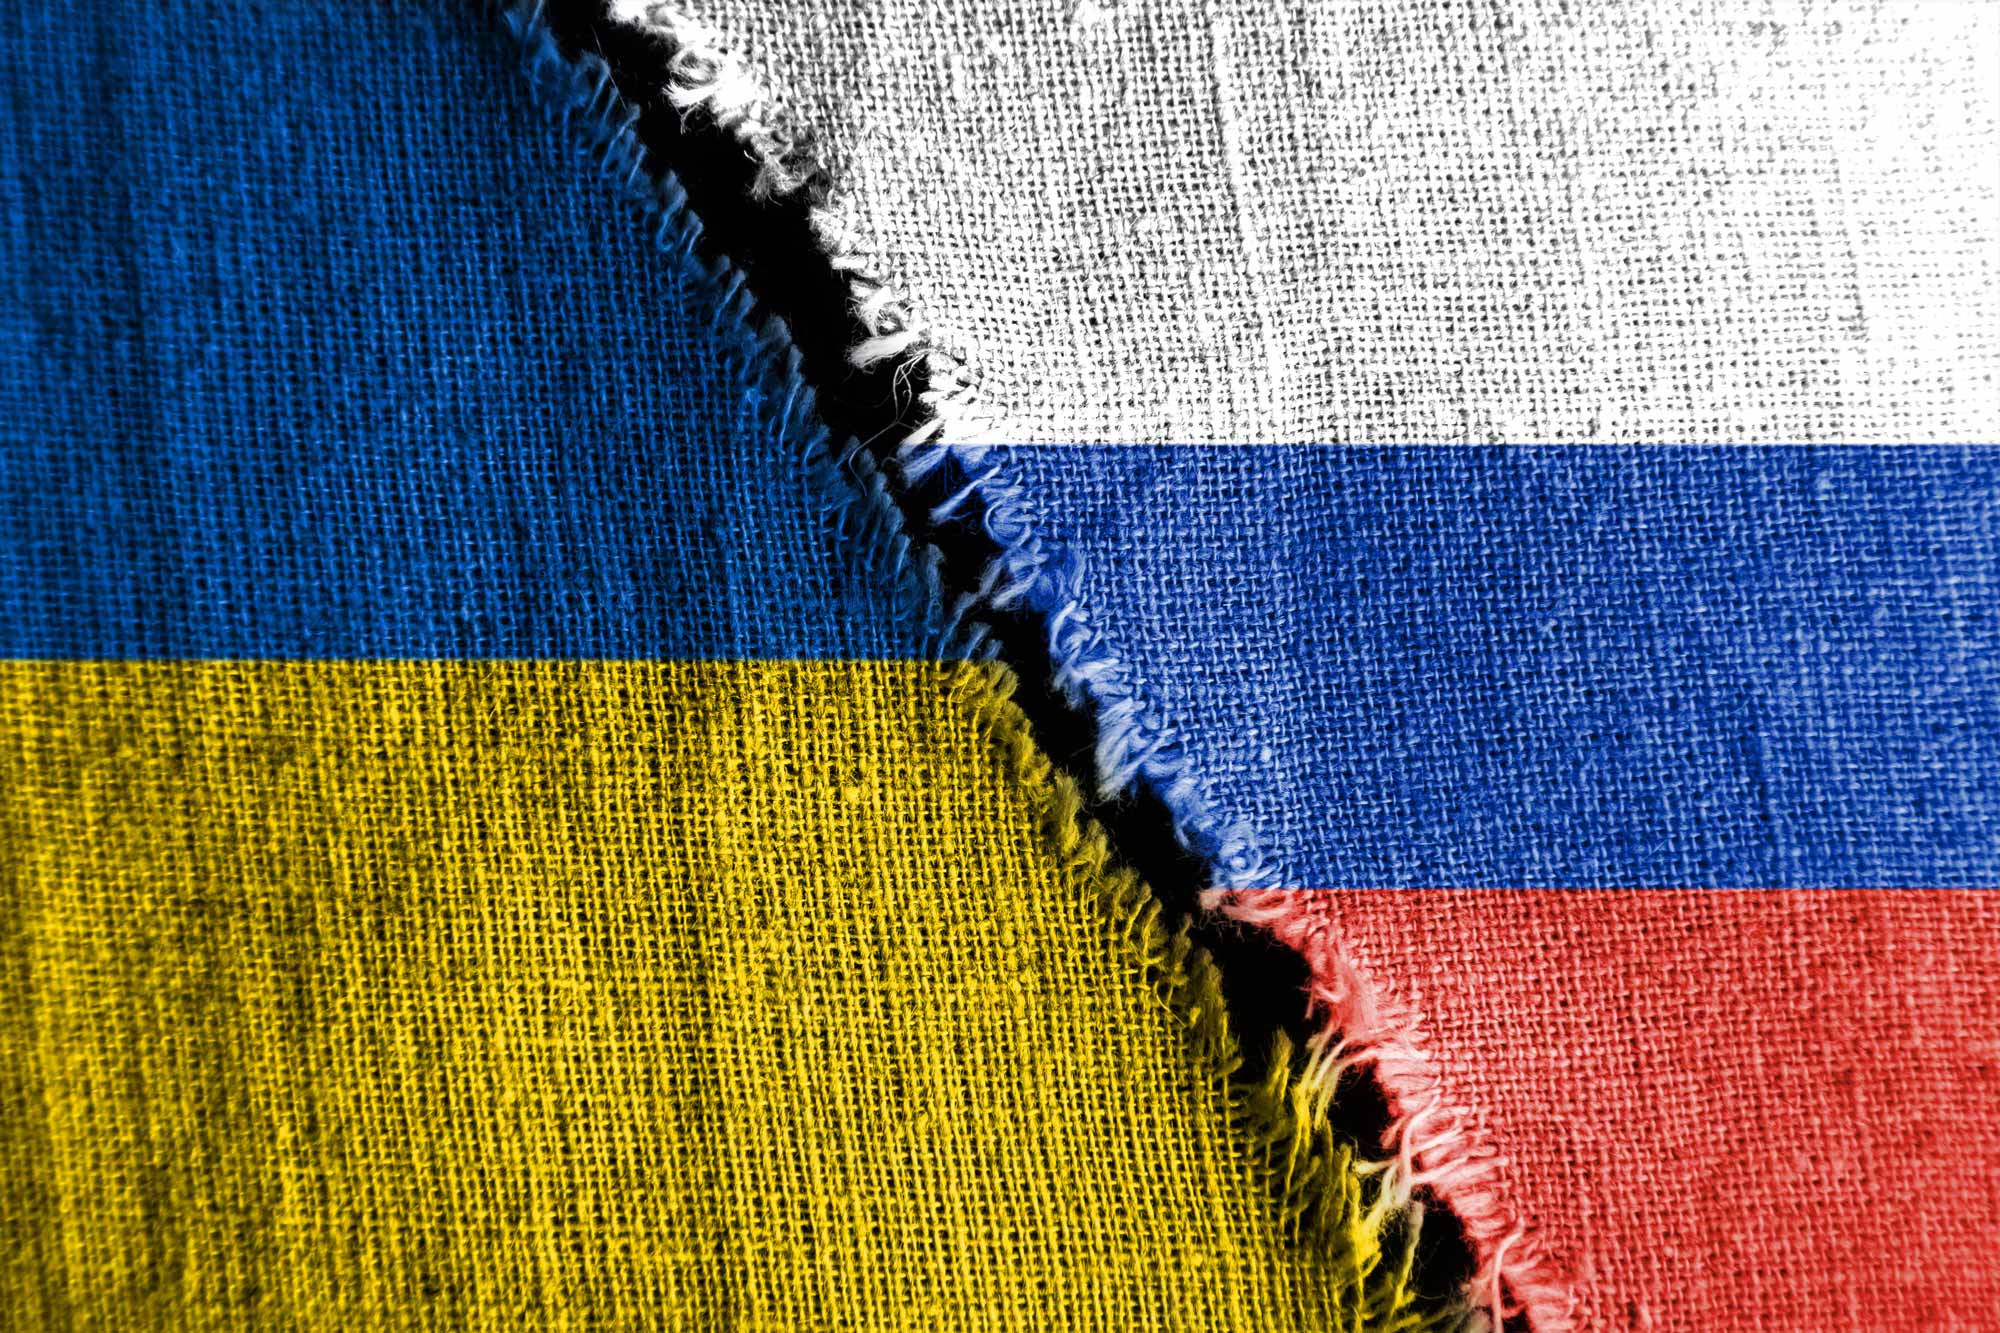 Ukraine flag on the left with frayed ends next to and a Russian flag on the right with frayed ends.  Black gap between them